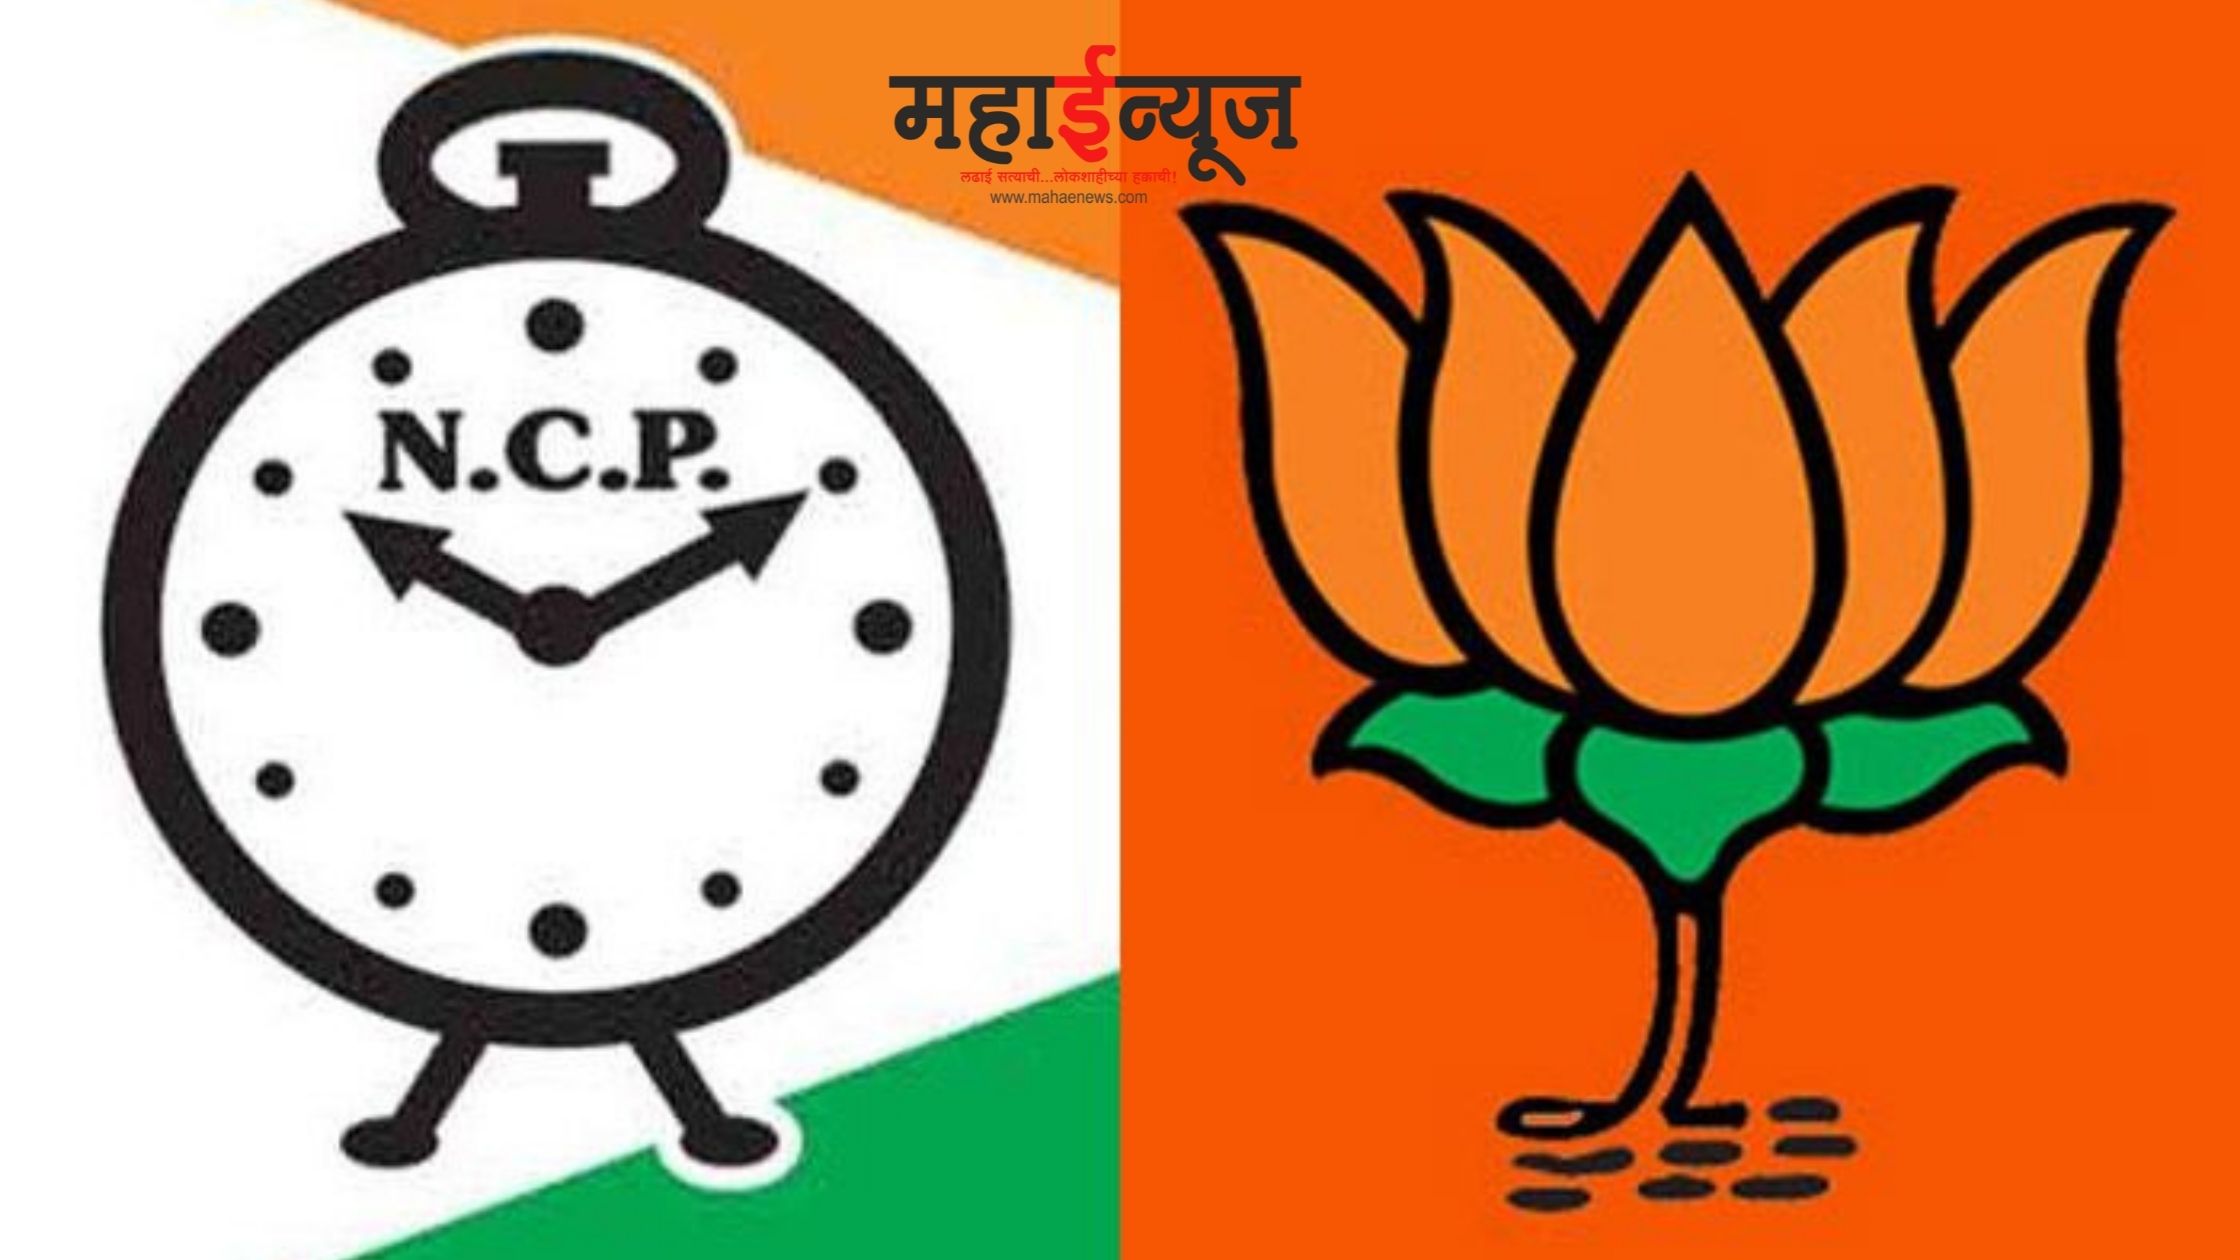 Pimpri-Chinchwad has been decided by the NCP: to give a blow to the ruling BJP?